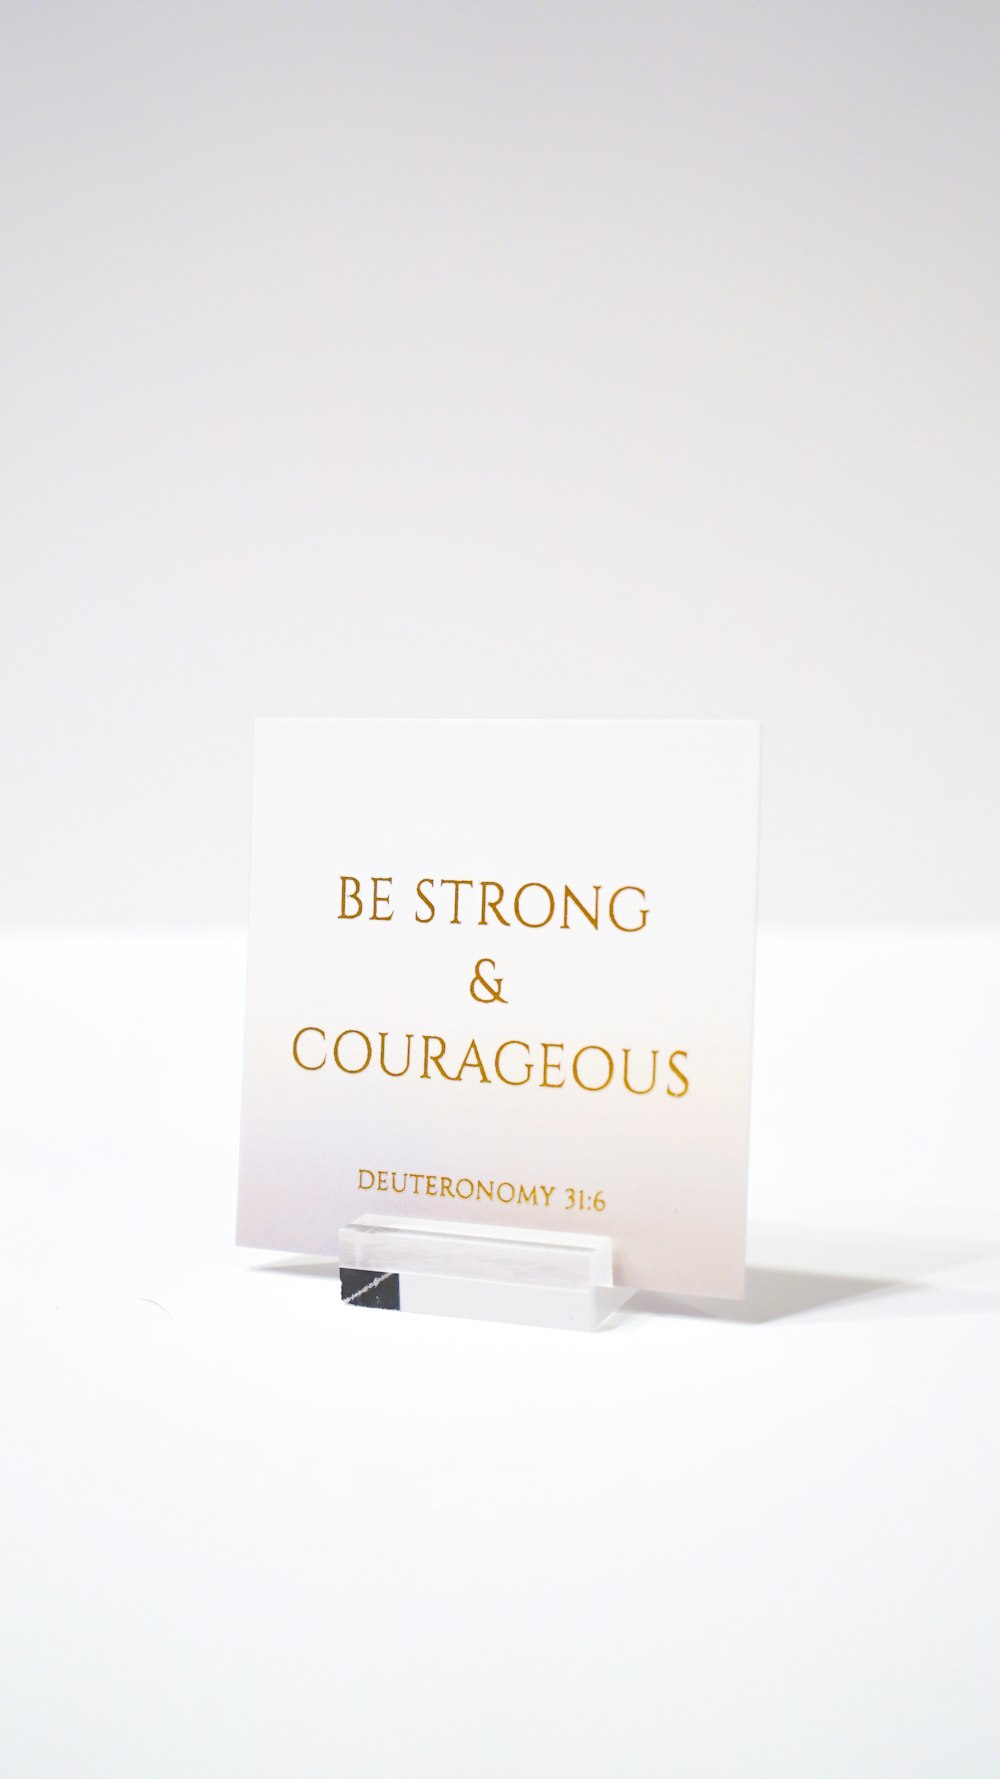 white paper with be strong and courageous printed text